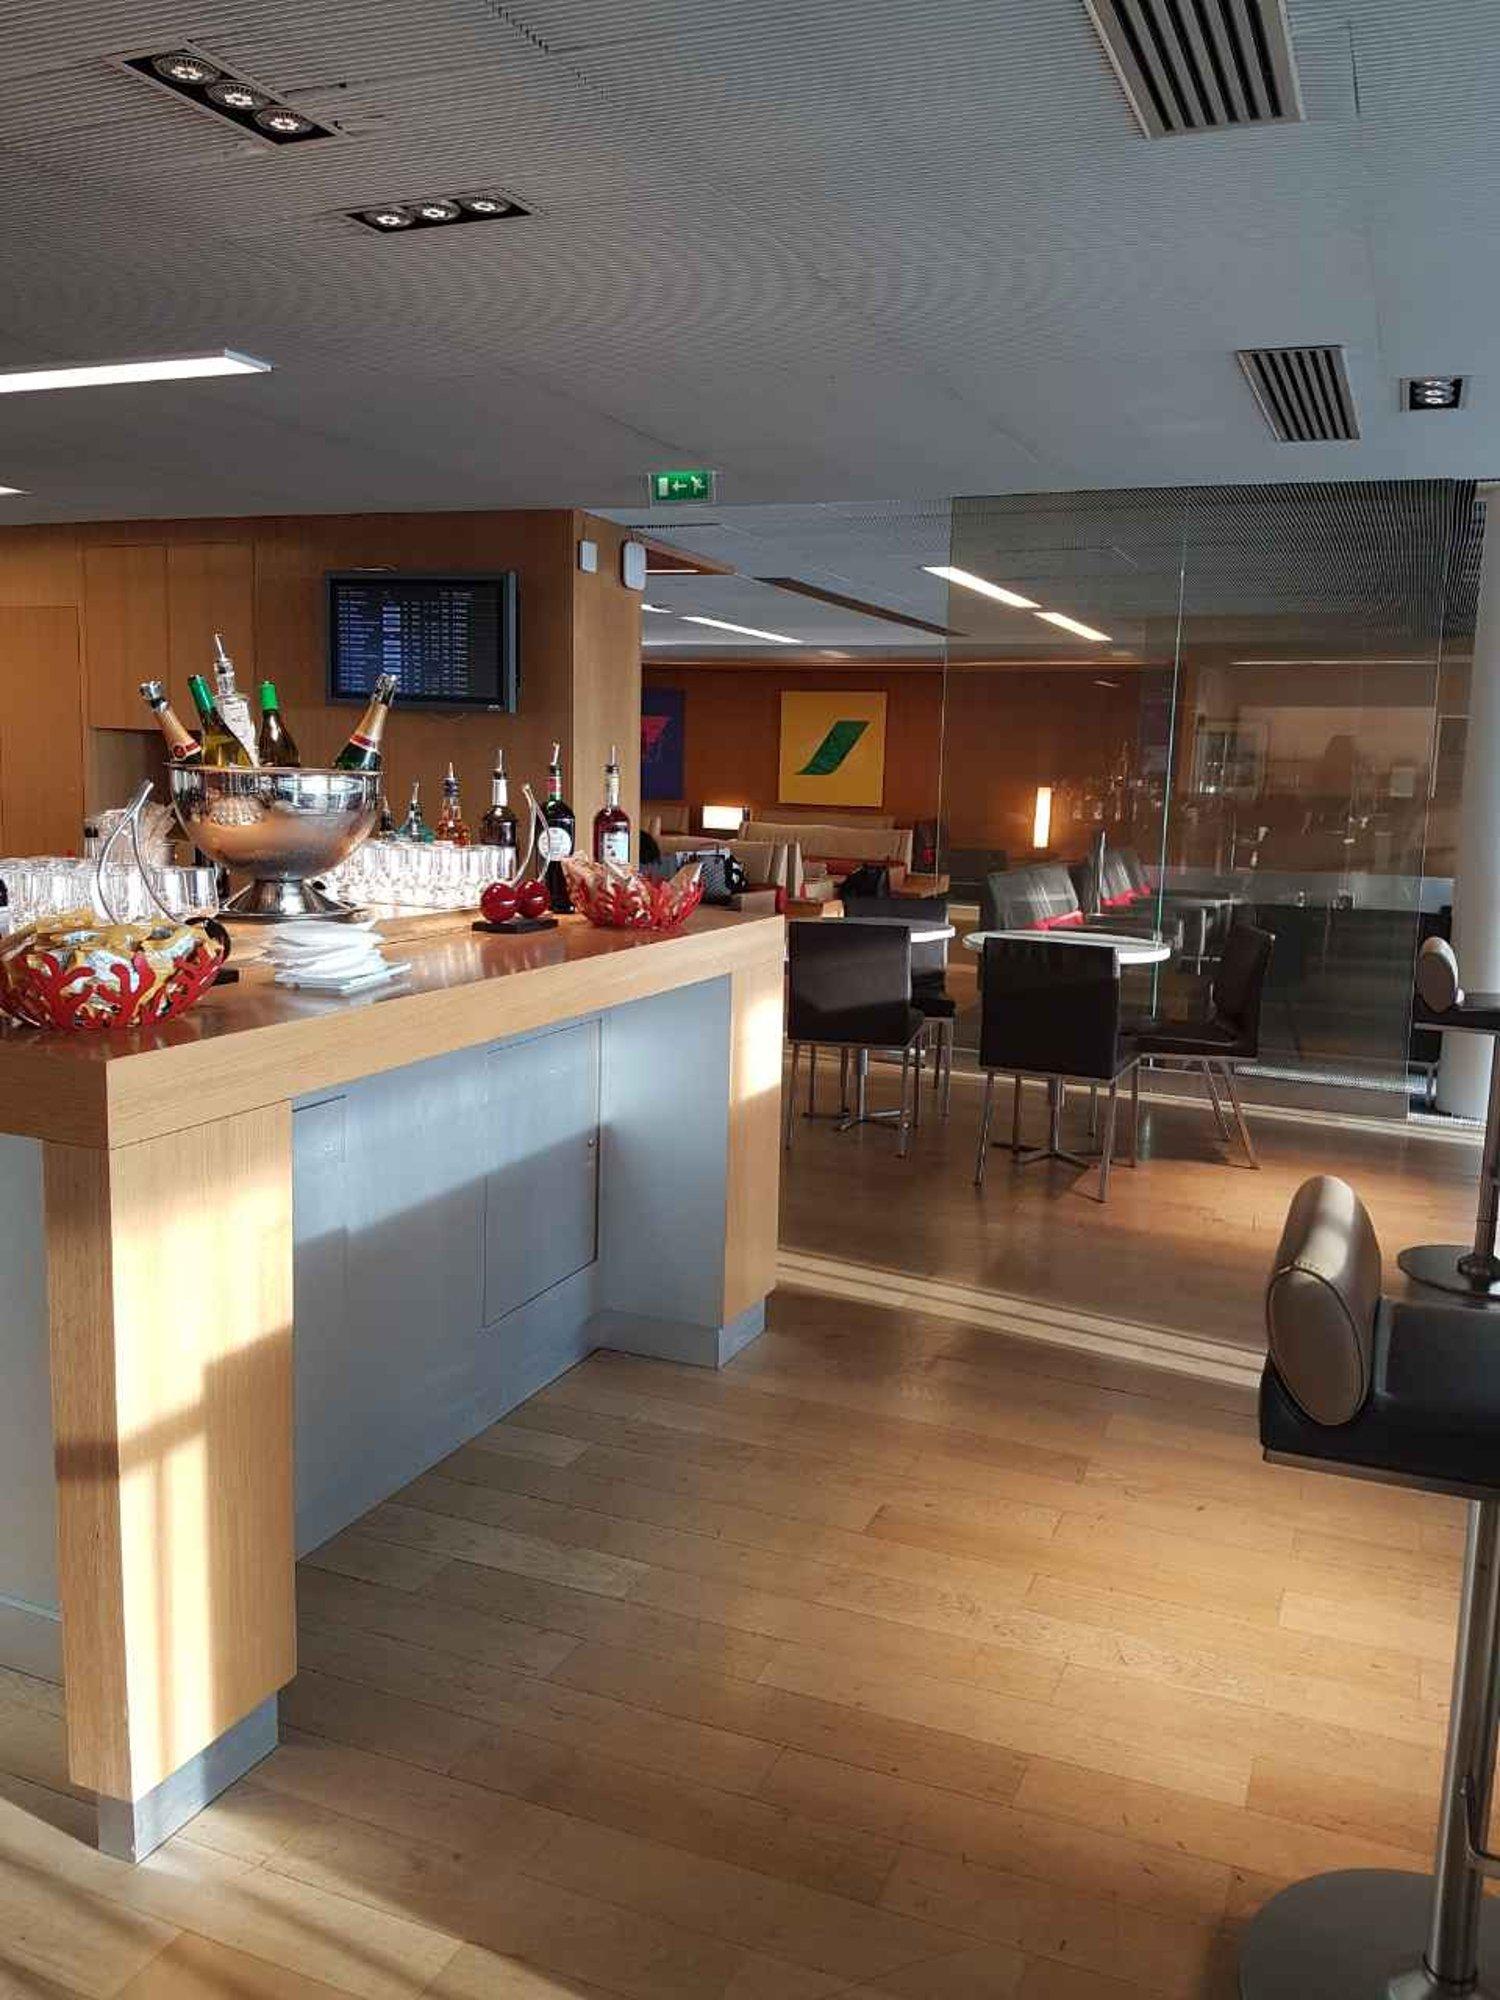 Air France Lounge (Concourse K) image 9 of 35